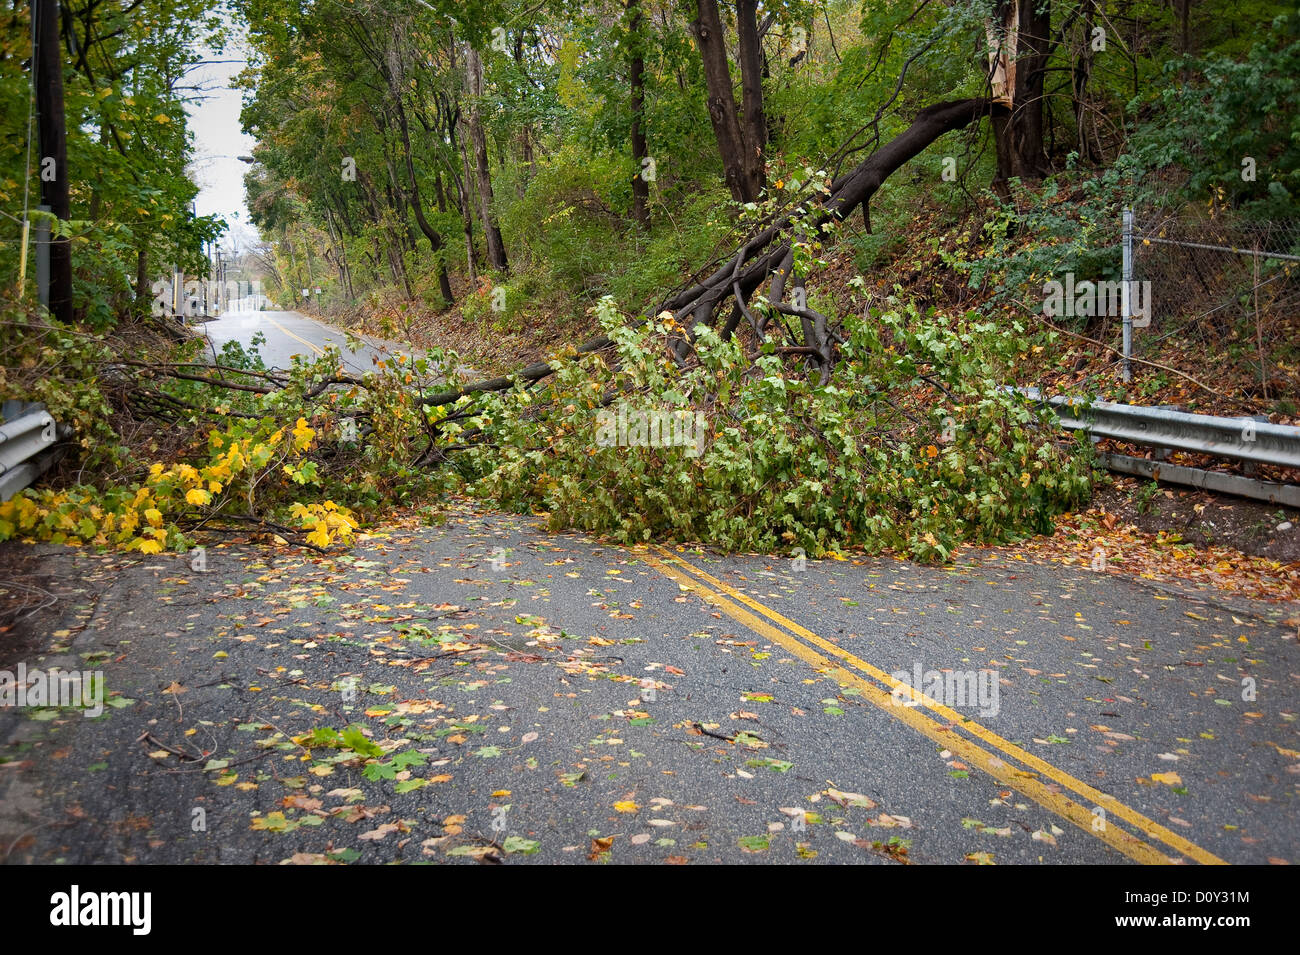 Tree In Road After Storm Damage Stock Photo